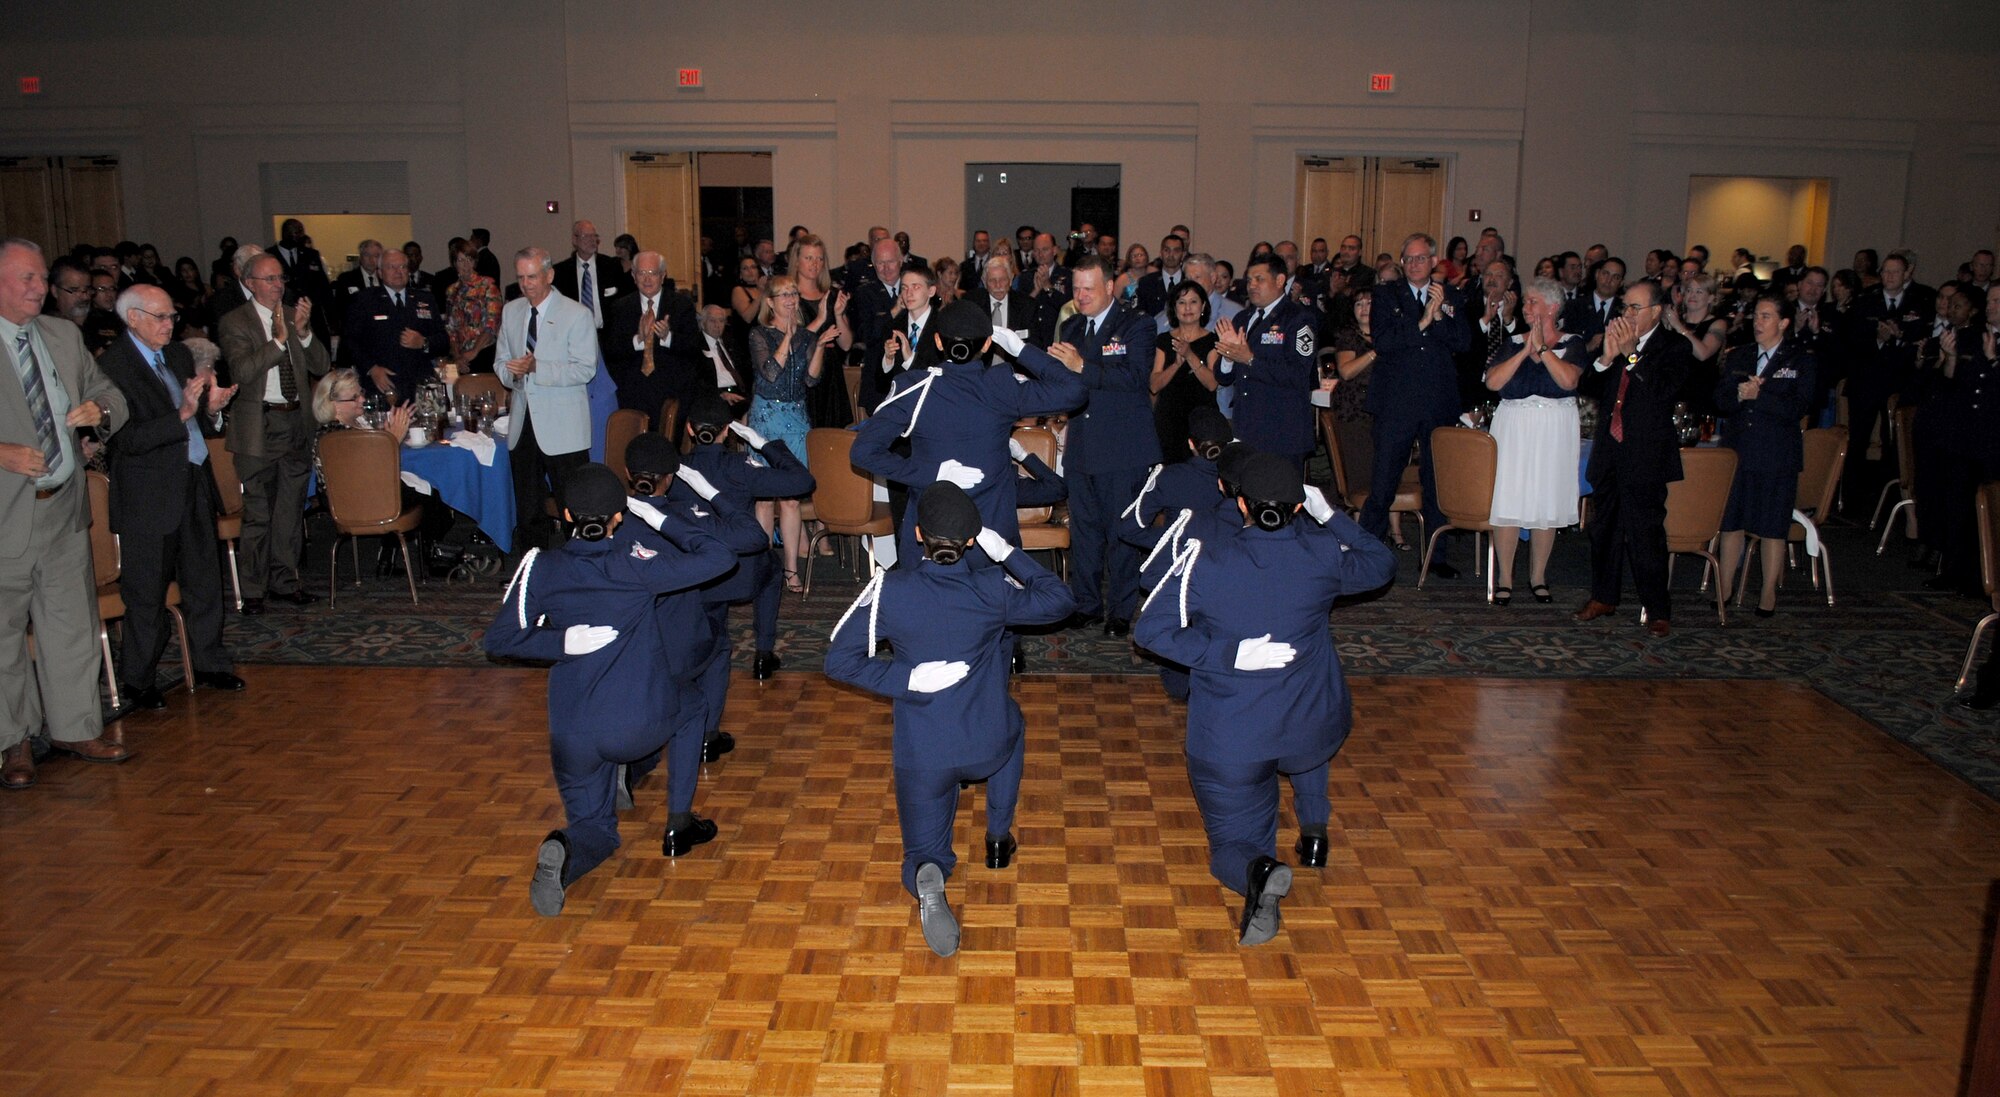 With excitement and roaring cheers guests give a standing ovation for the Brandeis High School all-female Air Force Junior ROTC unarmed precision drill team, the Blue Aces, who treated quests to a sharp-stepping drill demonstration during the 433rd Airlift Wing 60th Anniversary Dinner held Sept. 10, 2011, at the Gateway Club on Lackland Air Force Base, Texas. The local San Antonio area group said they were excited and proud to have been part of the Alamo Wing's historic celebration. (U.S. Air Force photo/Senior Airman Luis Loza Gutierrez)